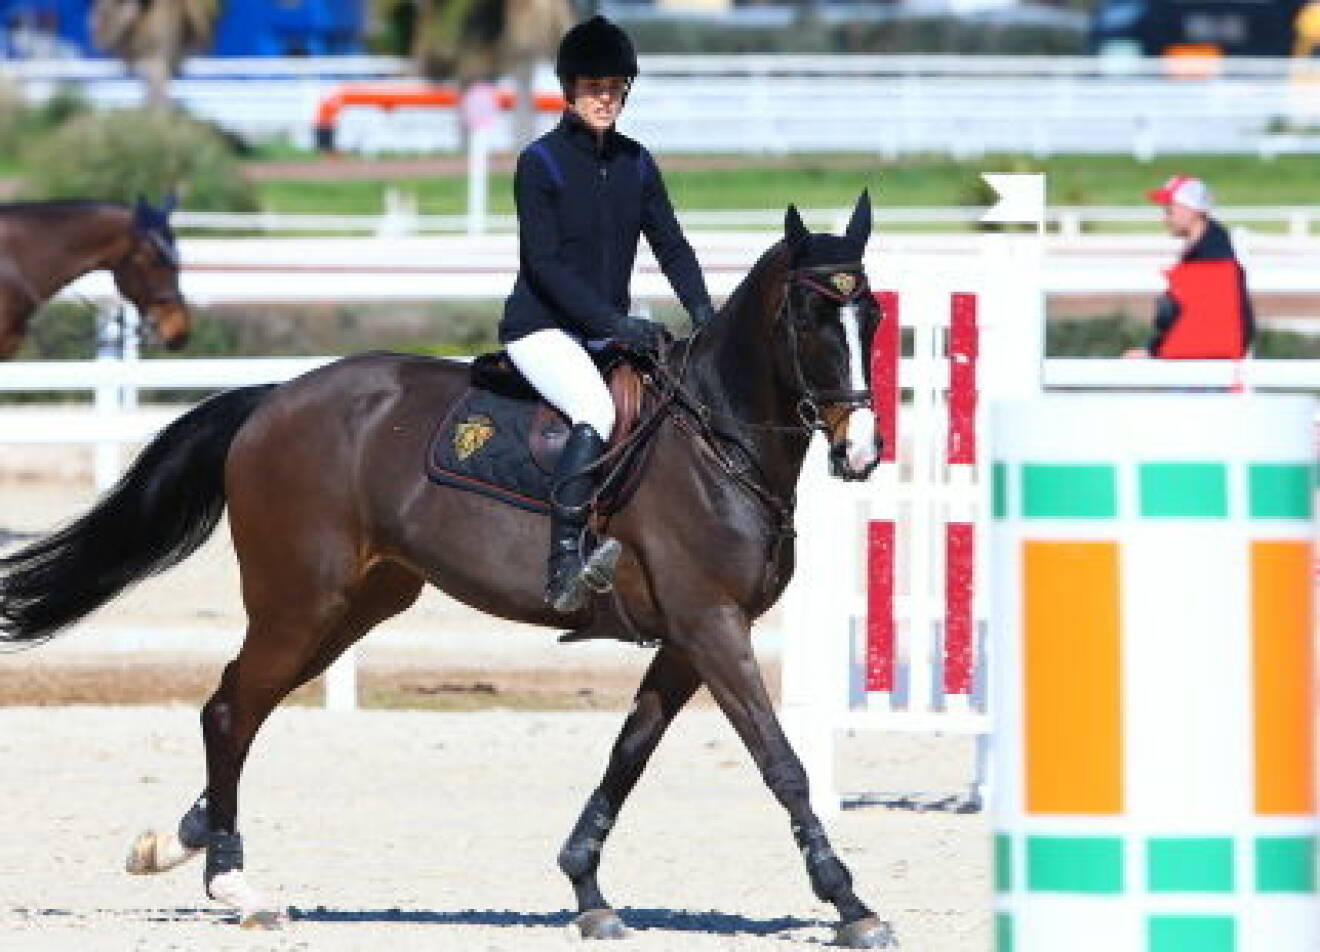 Charlotte Casiraghi competes at GPA Jump Festival